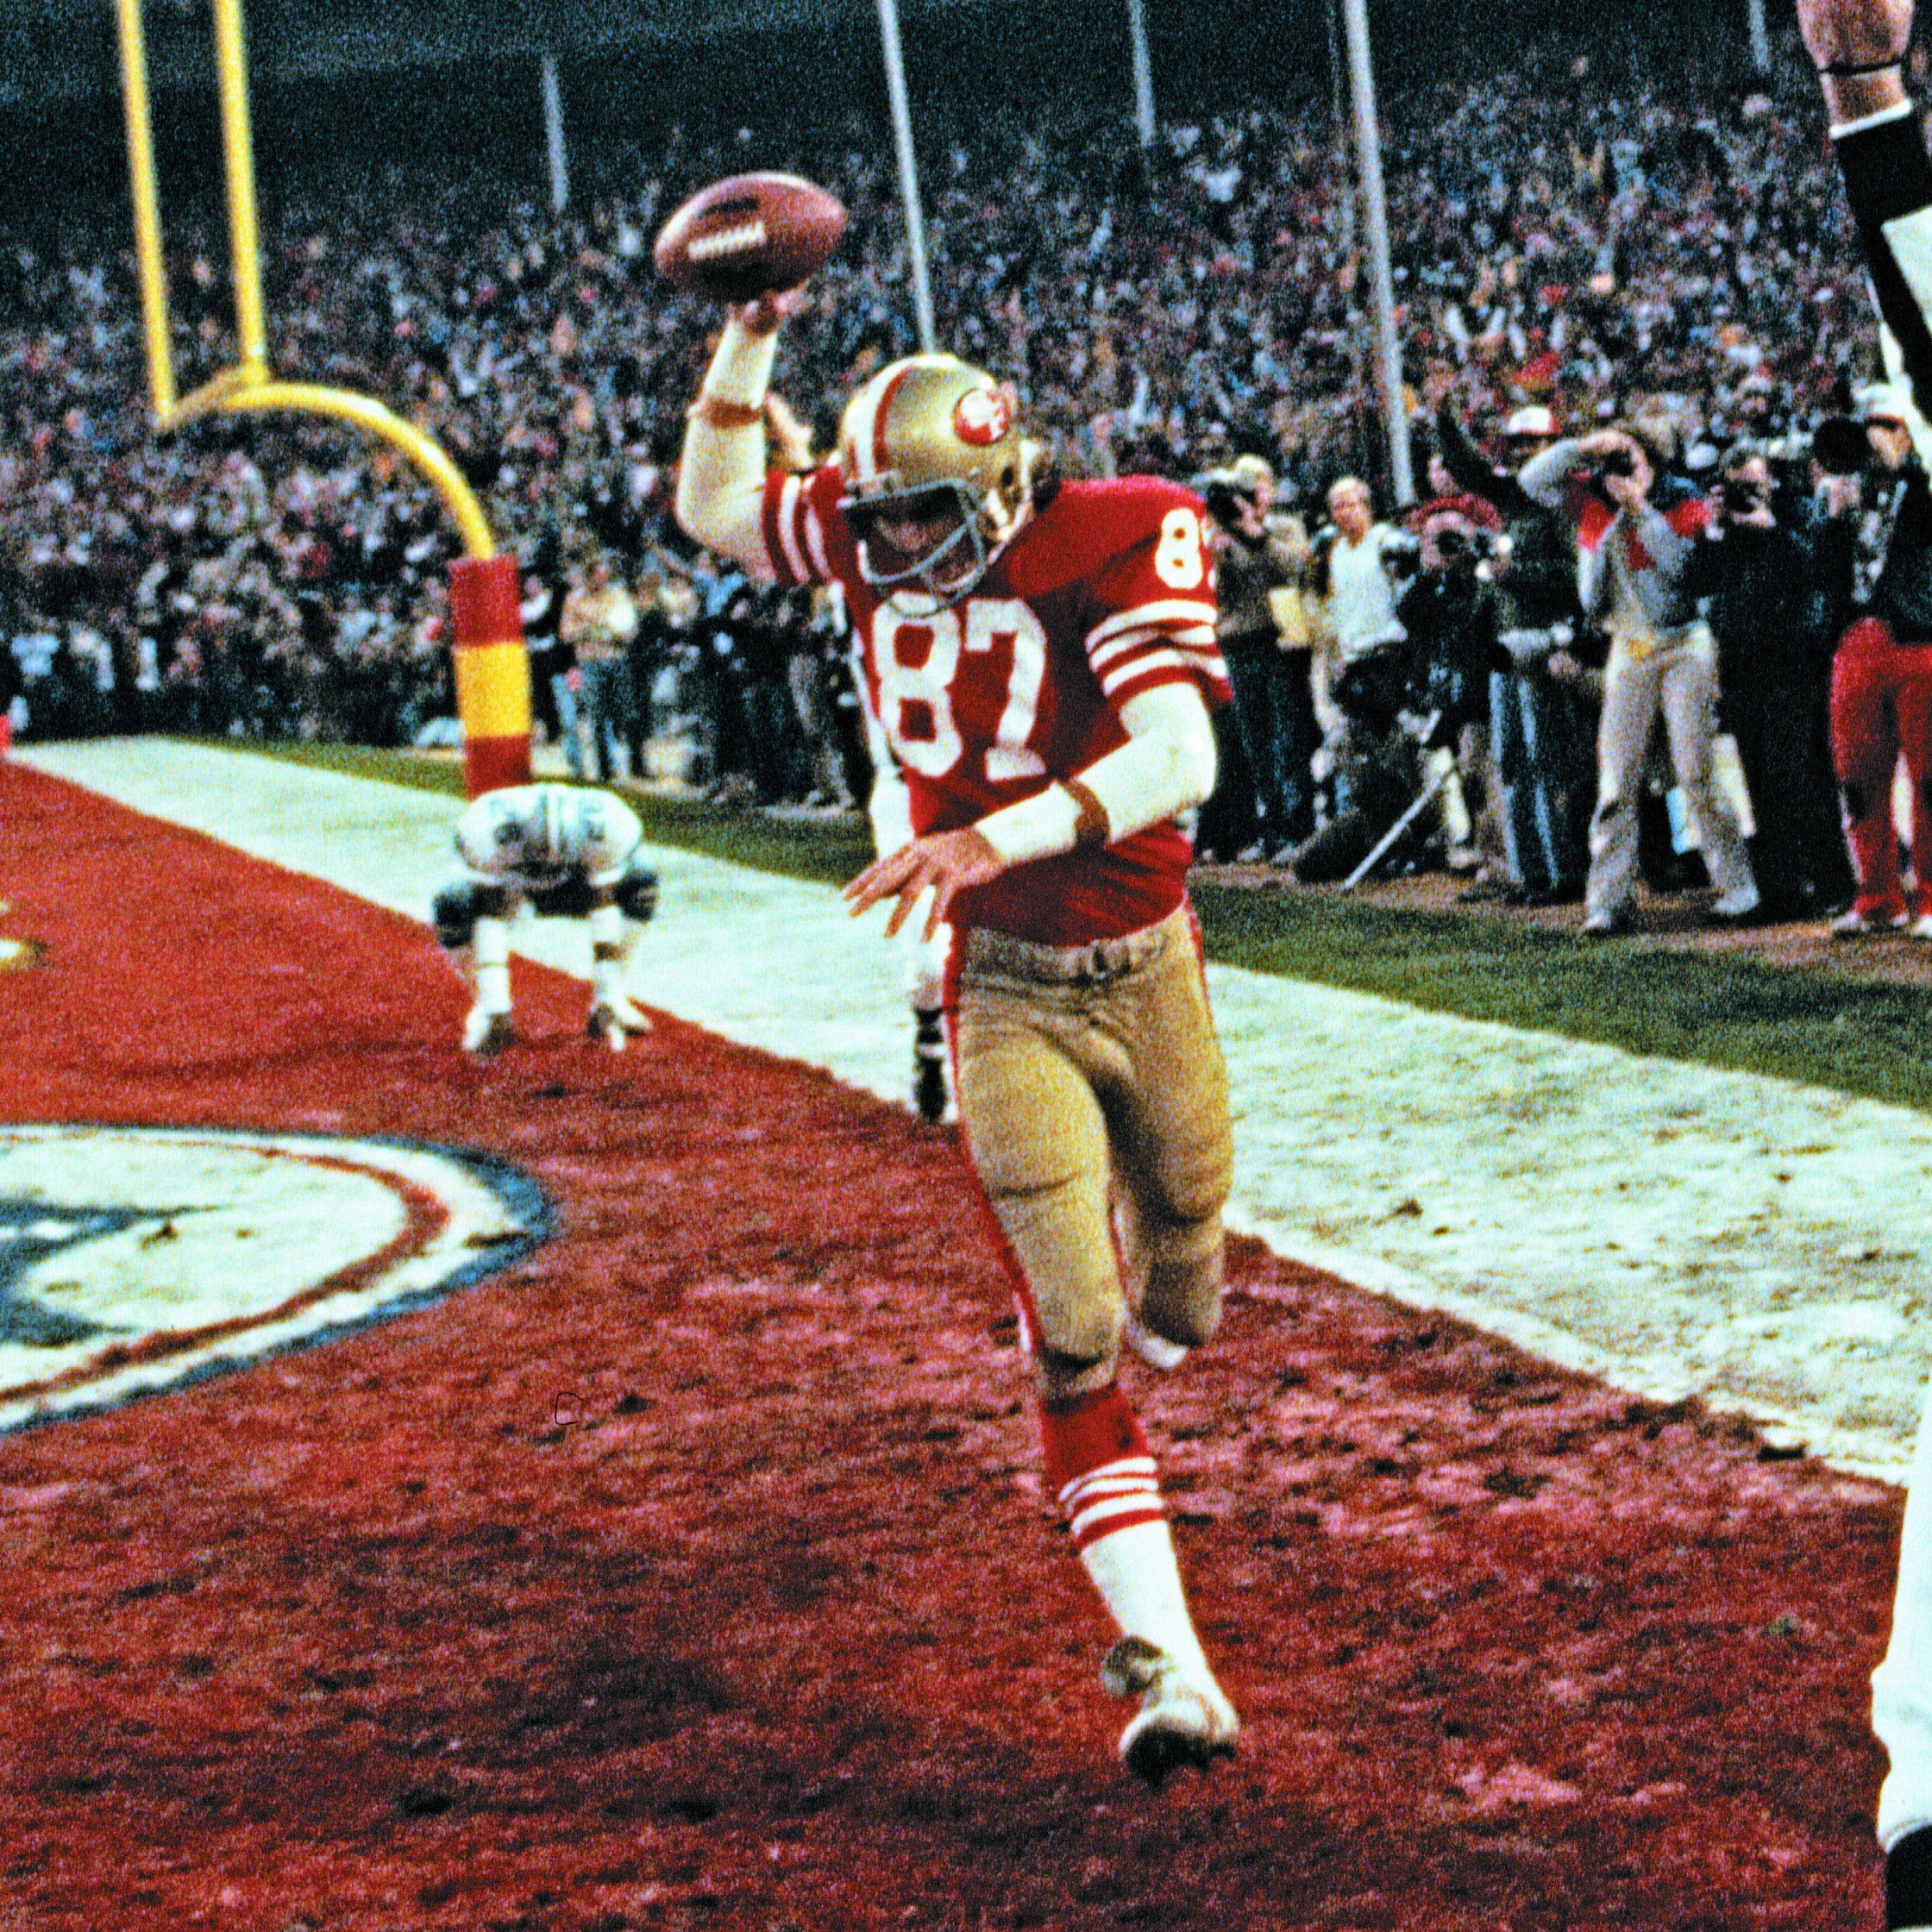 Joe Montana to Dwight Clark for 'The Catch' and 1982 NFC title as